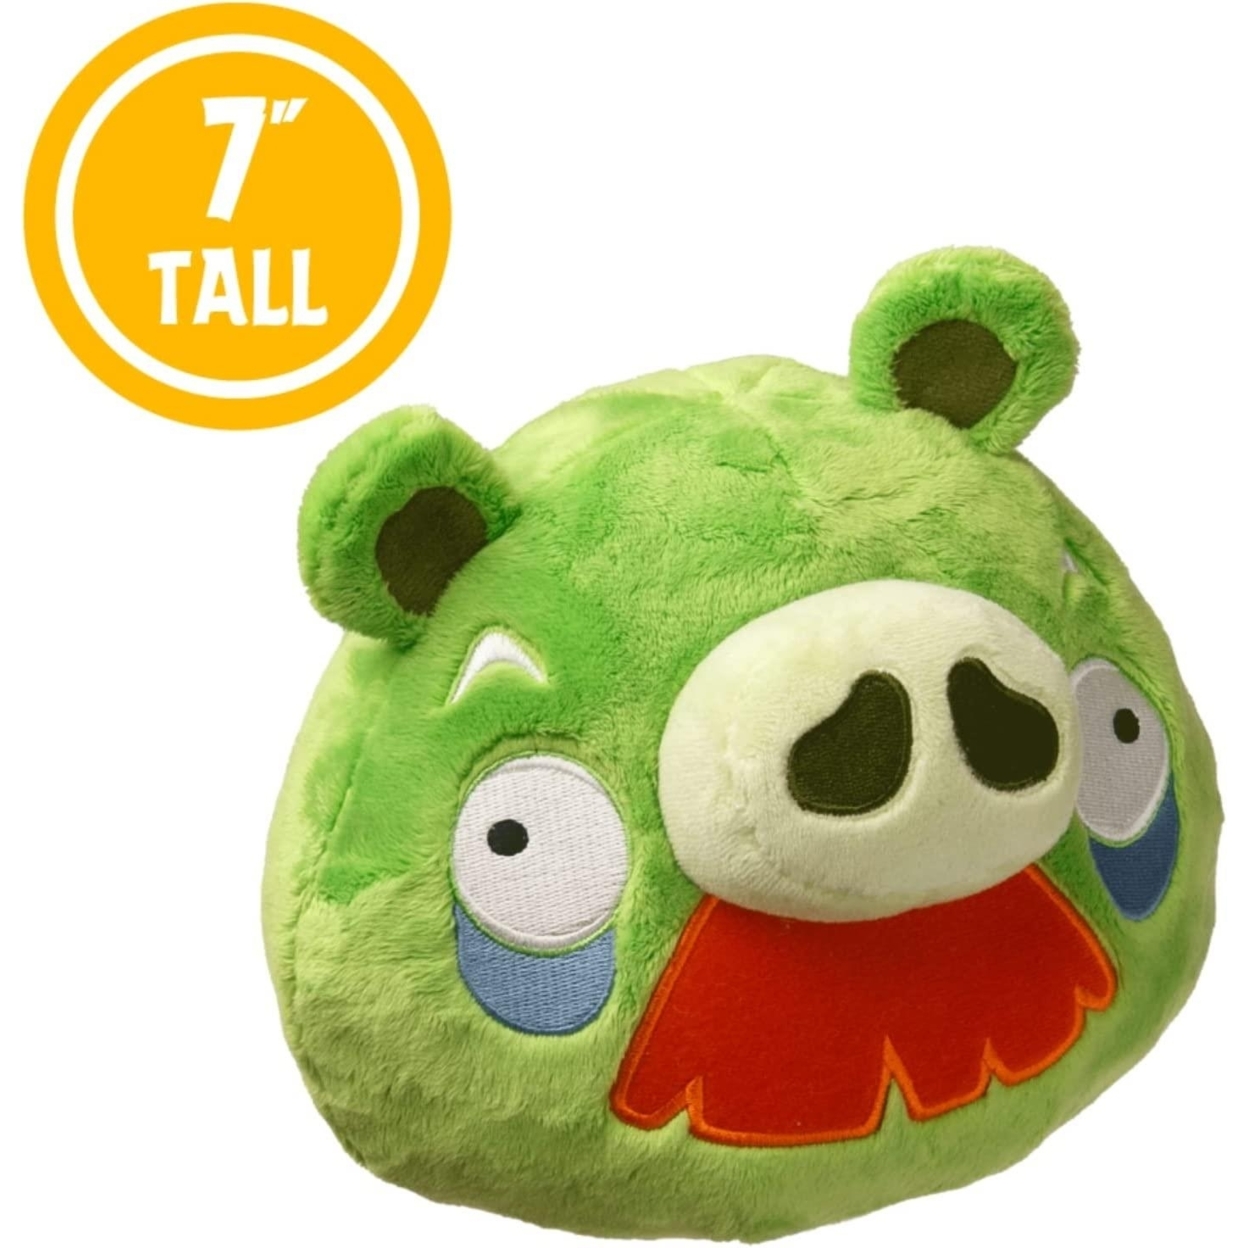 Angry Birds Green Moustache Foreman Pig Plush Bad Piggies 7 Pillow Doll Soft Toy Mighty Mojo